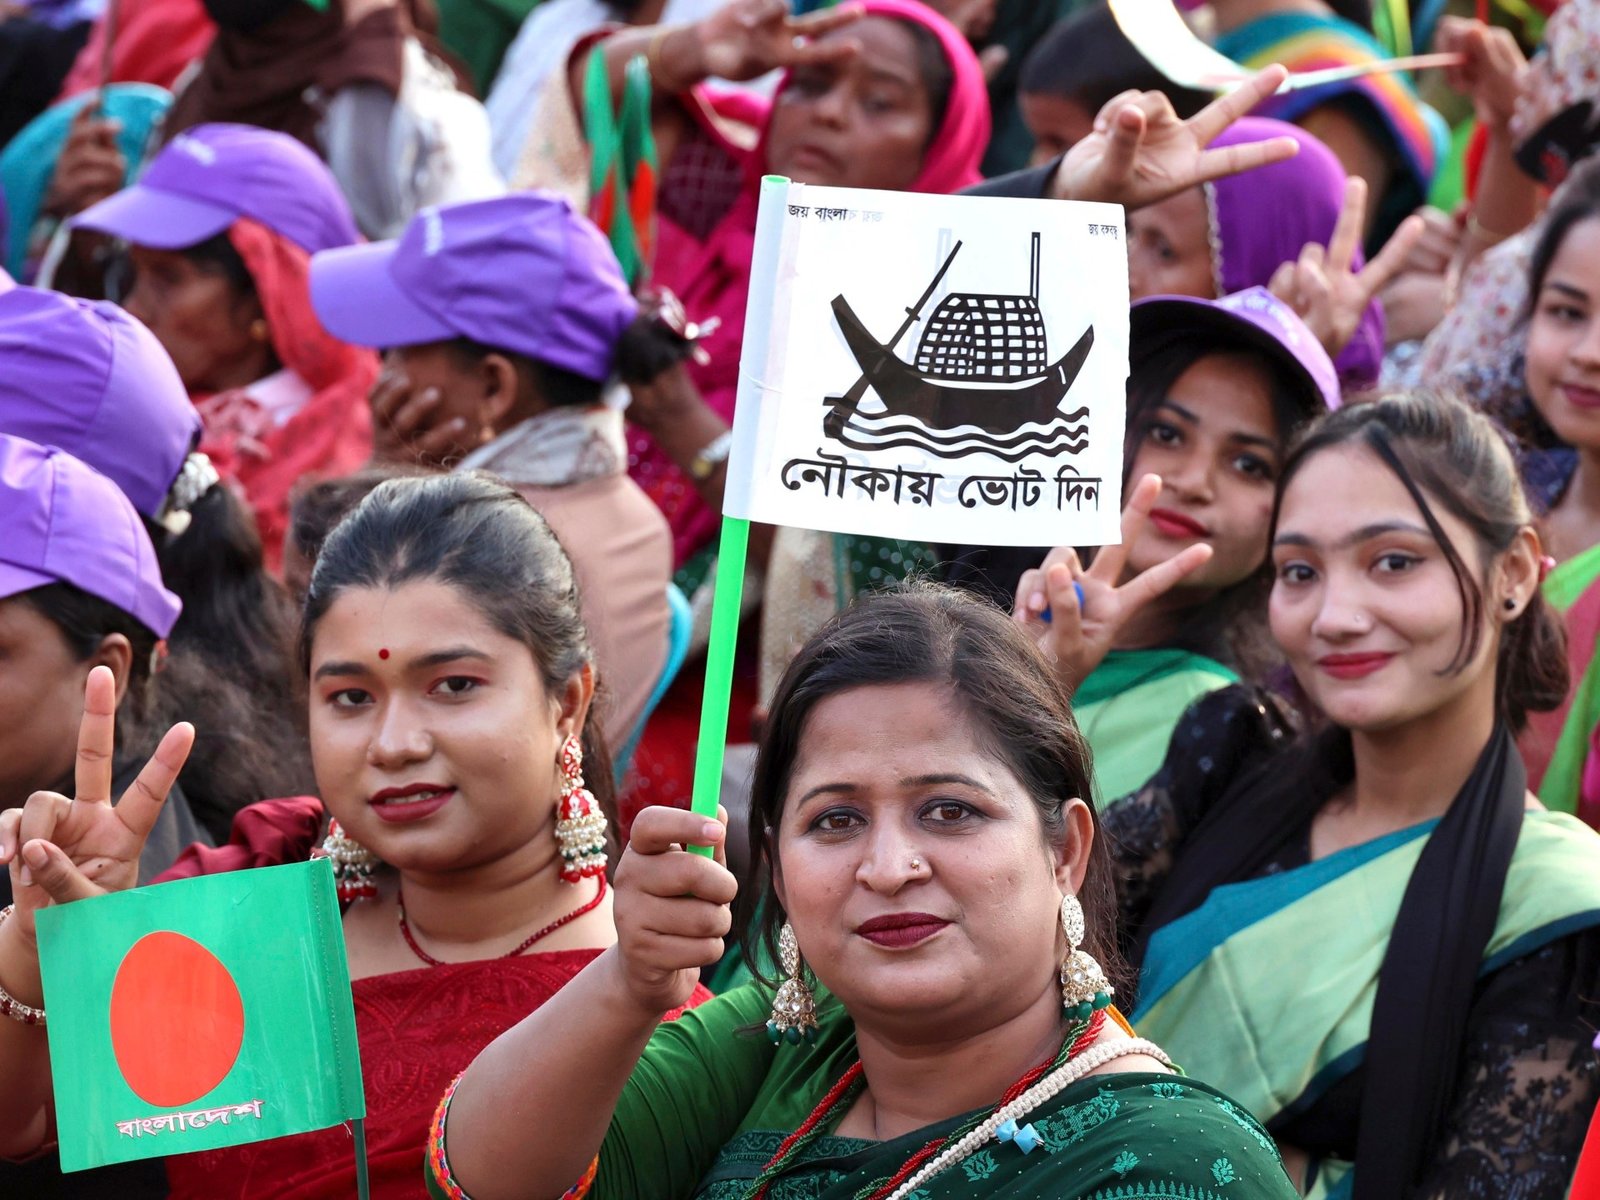 Bangladesh elections mark a pro-China tipping point in South Asia | Politics